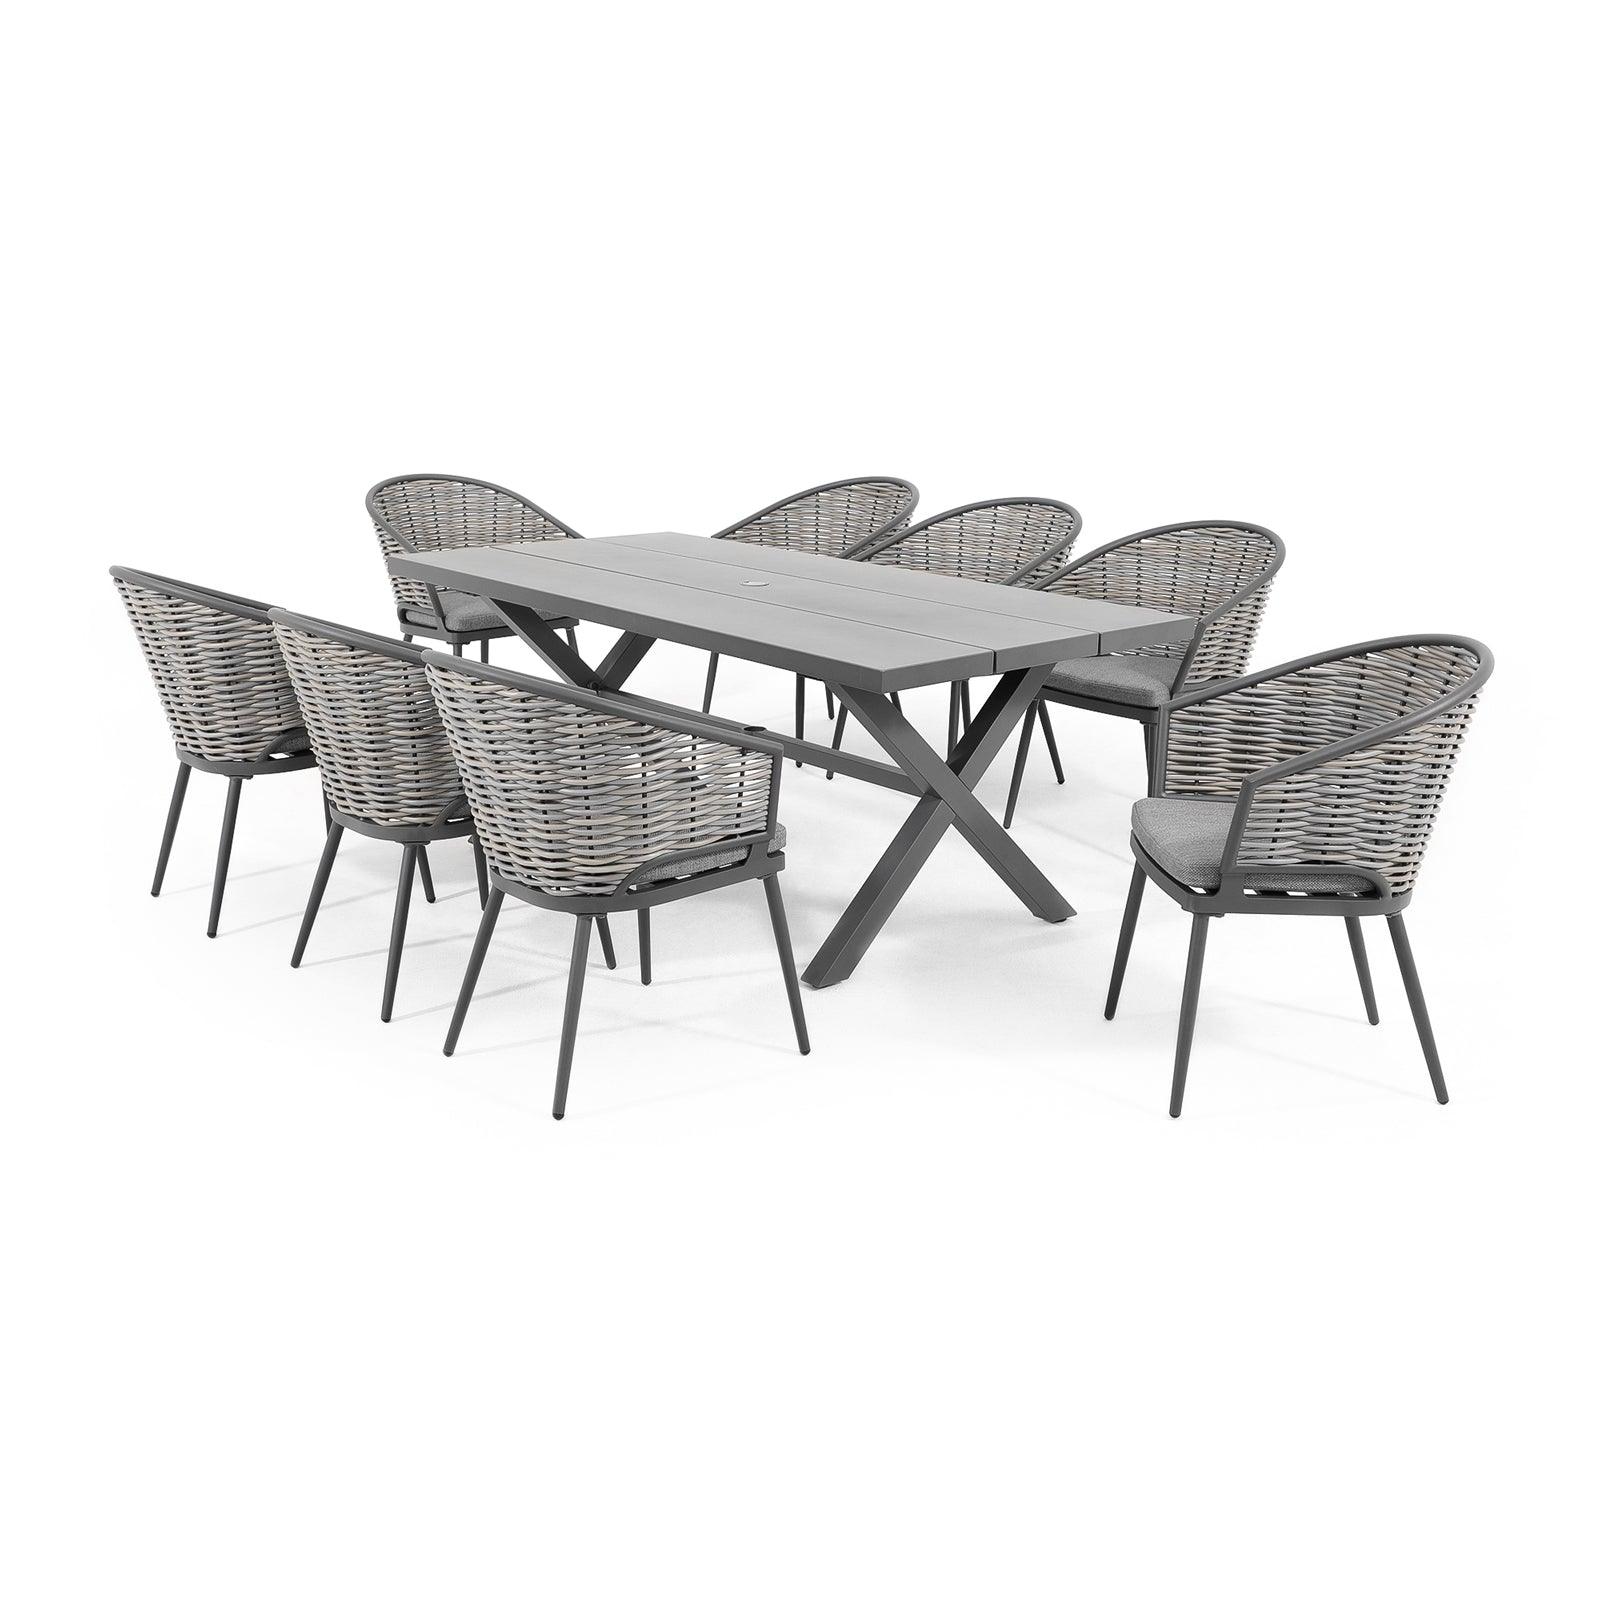 Burano Modern HDPE Wicker Outdoor Furniture, Grey wicker outdoor Dining Set with aluminum frame, 8 chairs with grey cushions, 1 aluminum X-Shaped rectangle dining Table - Jardina Furniture